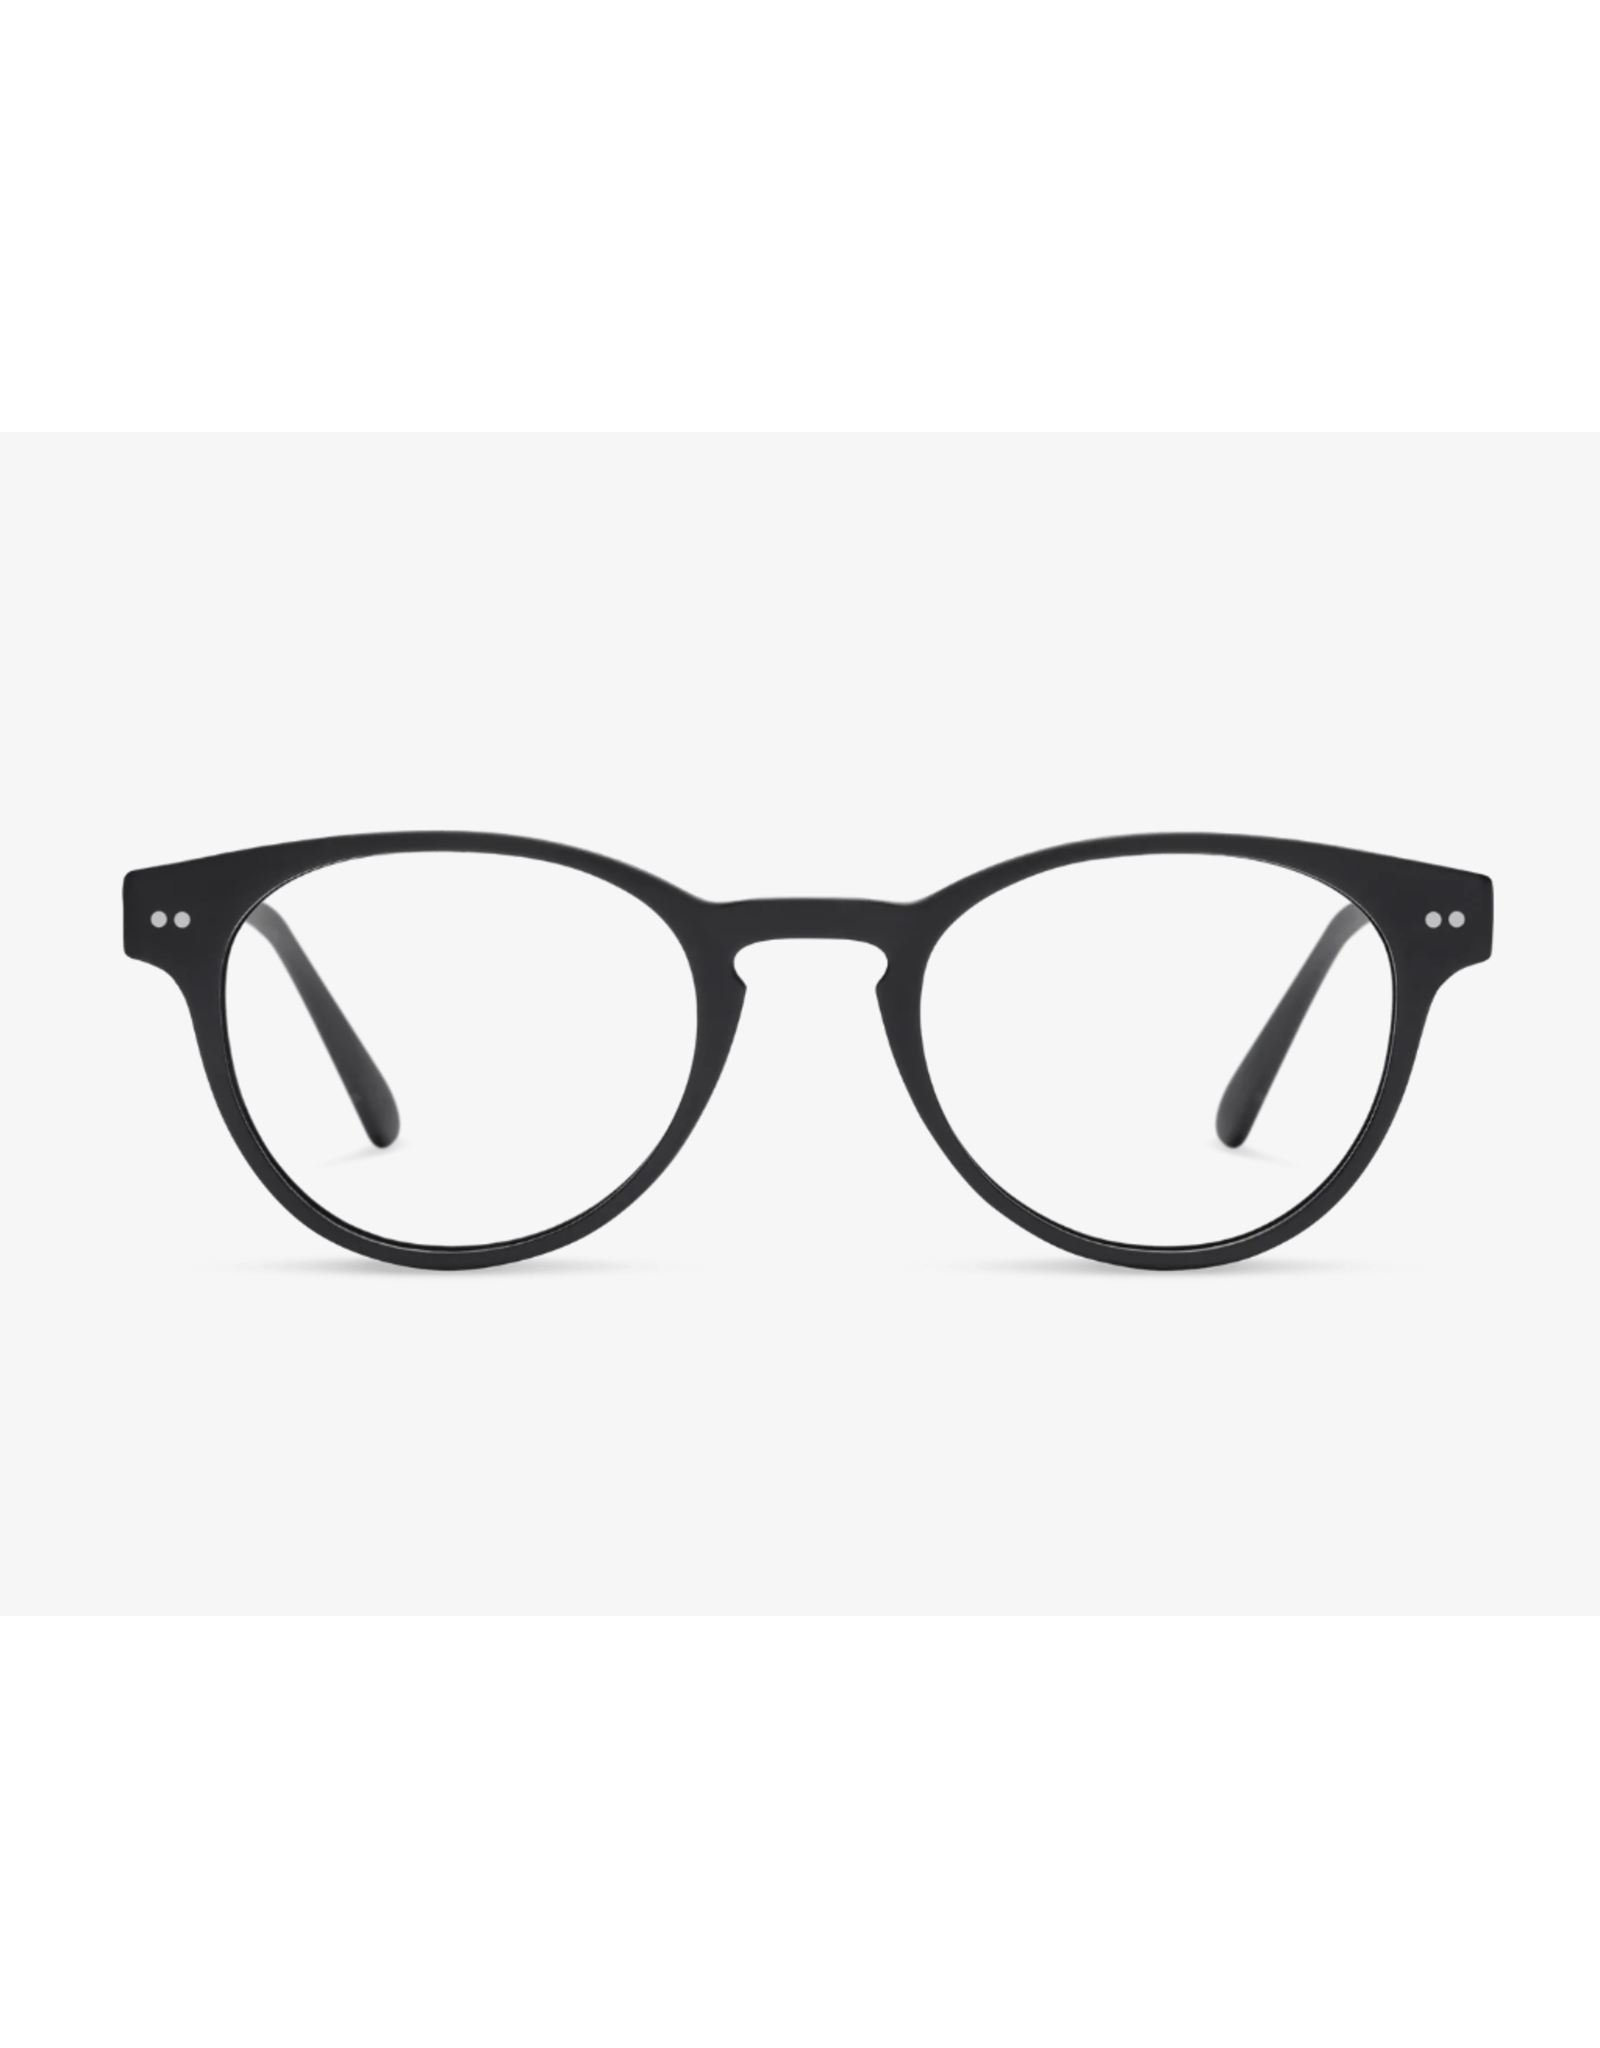 LOOK Abbey Readers in Black, 2.0 Magnification